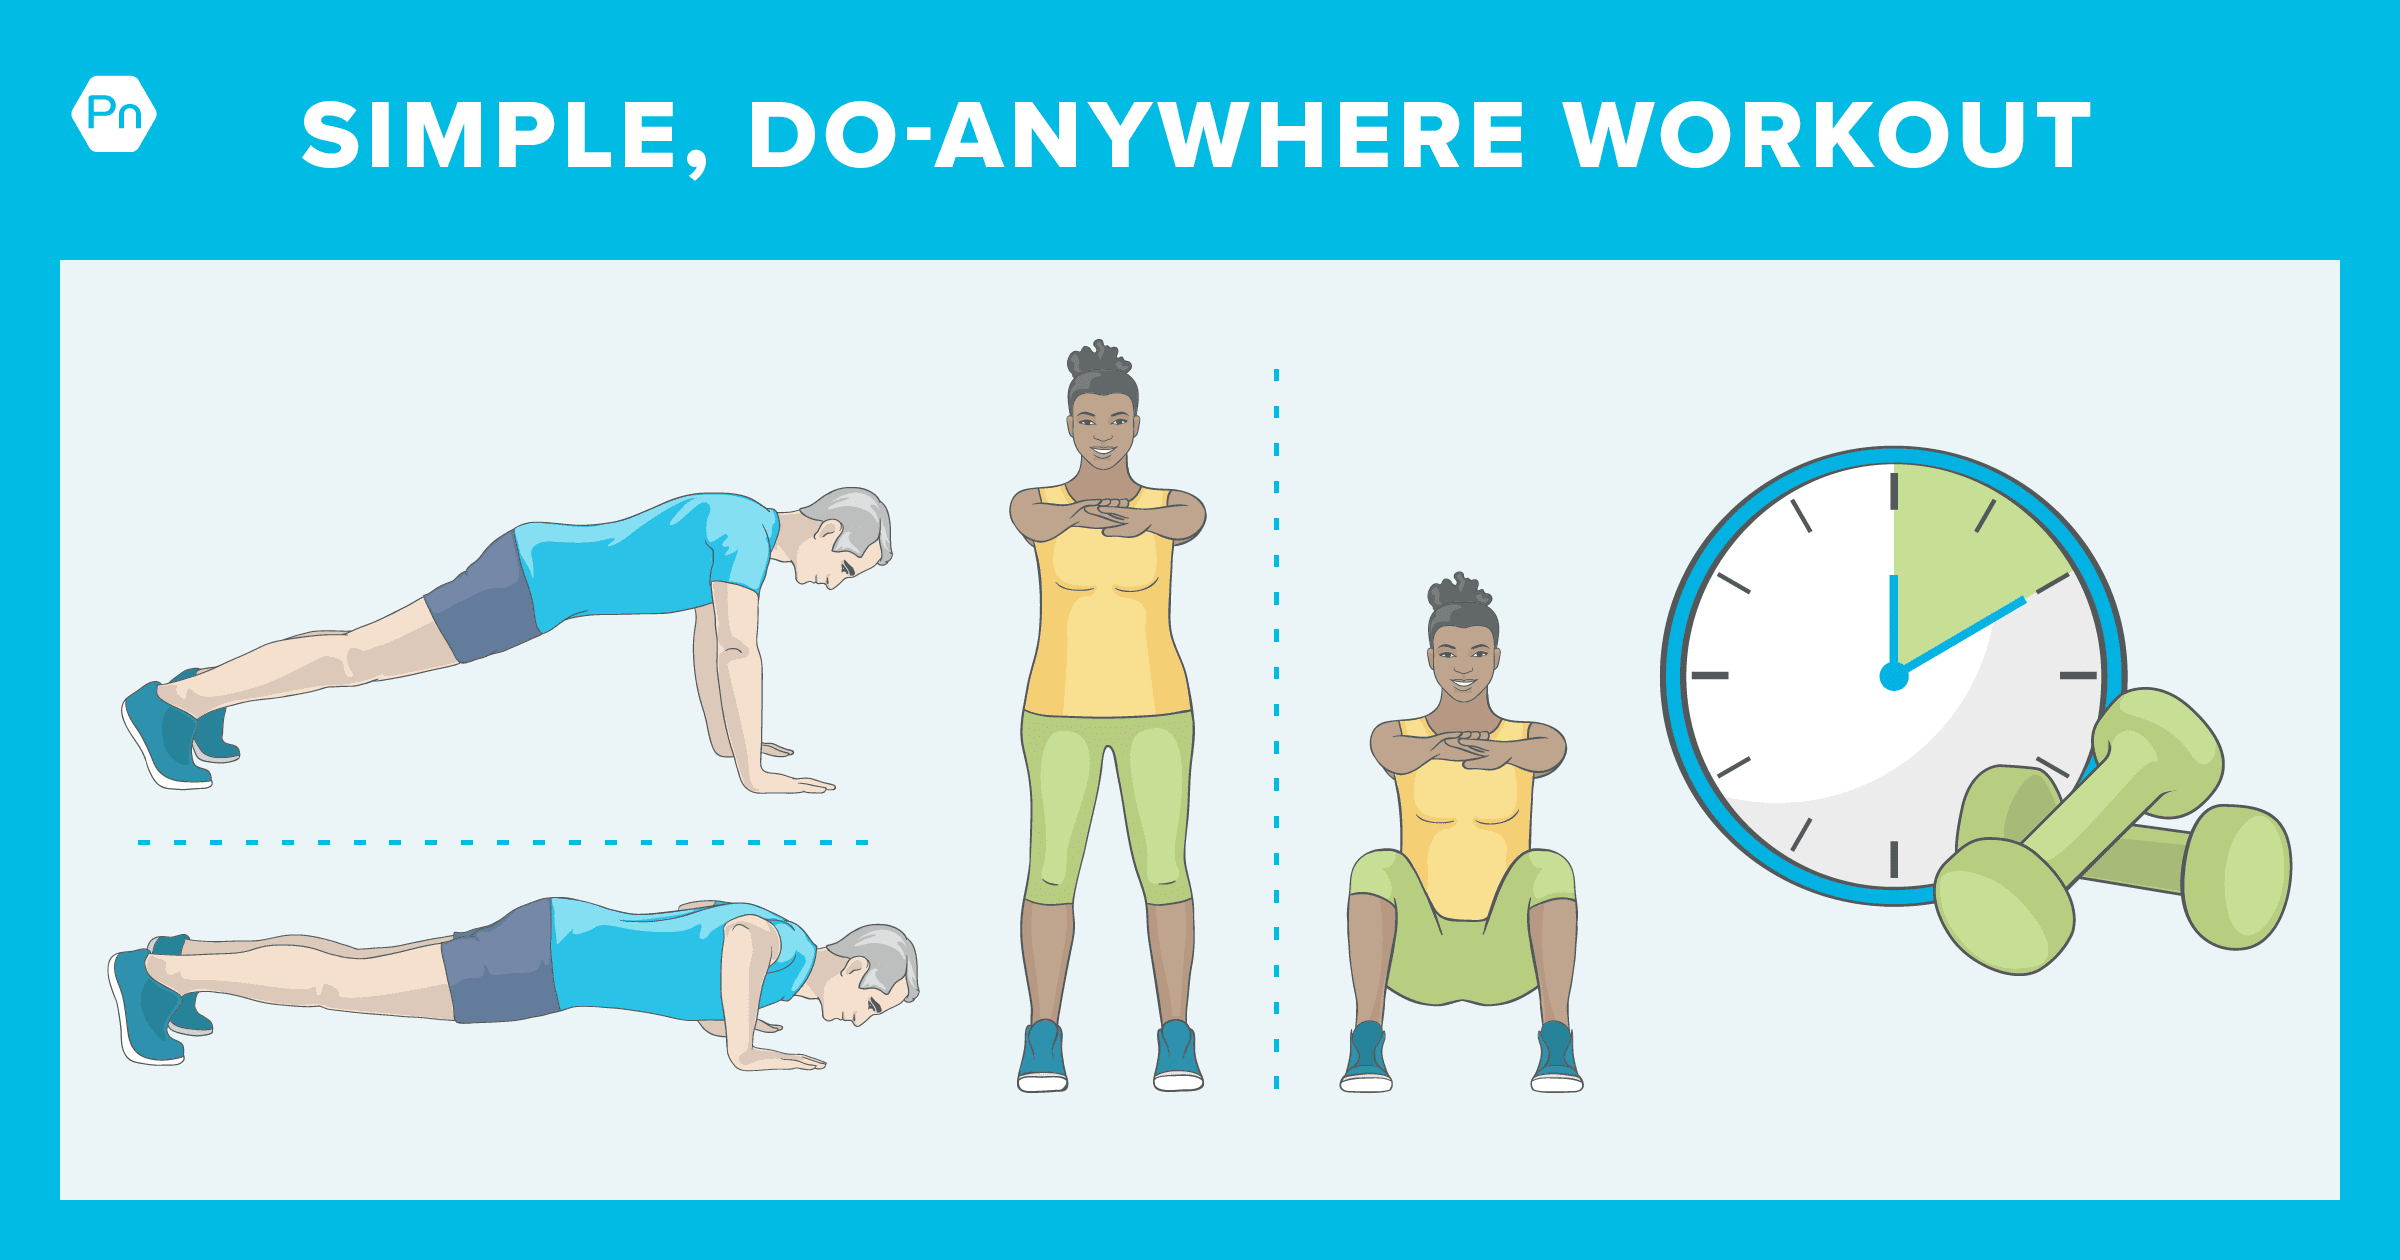 If you want to work out with minimal equipement, try this